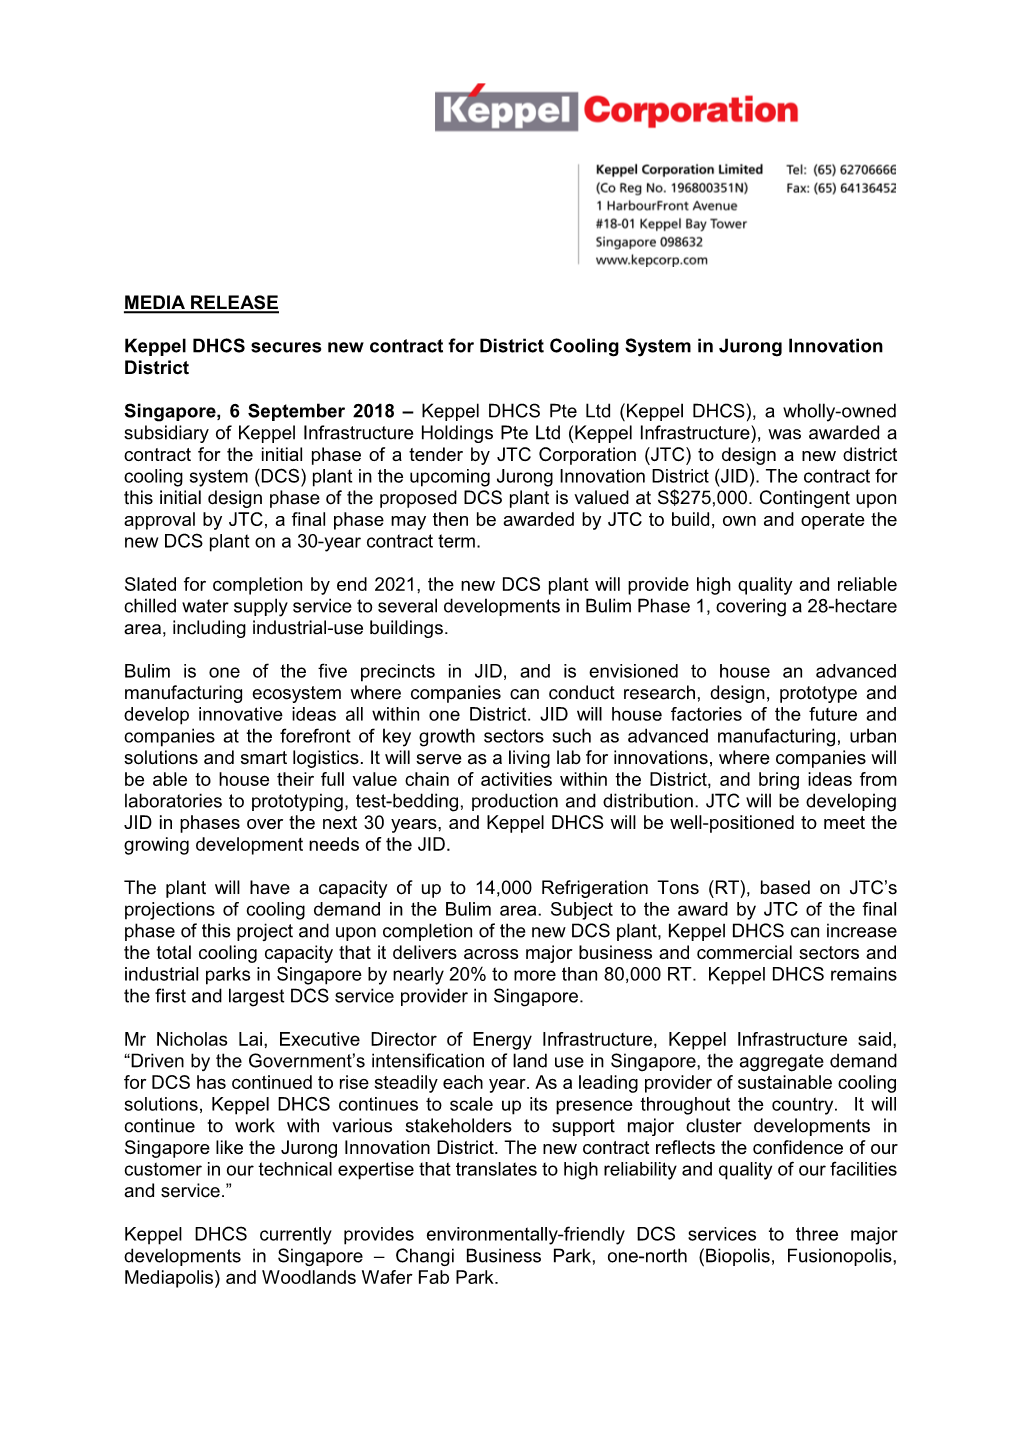 MEDIA RELEASE Keppel DHCS Secures New Contract for District